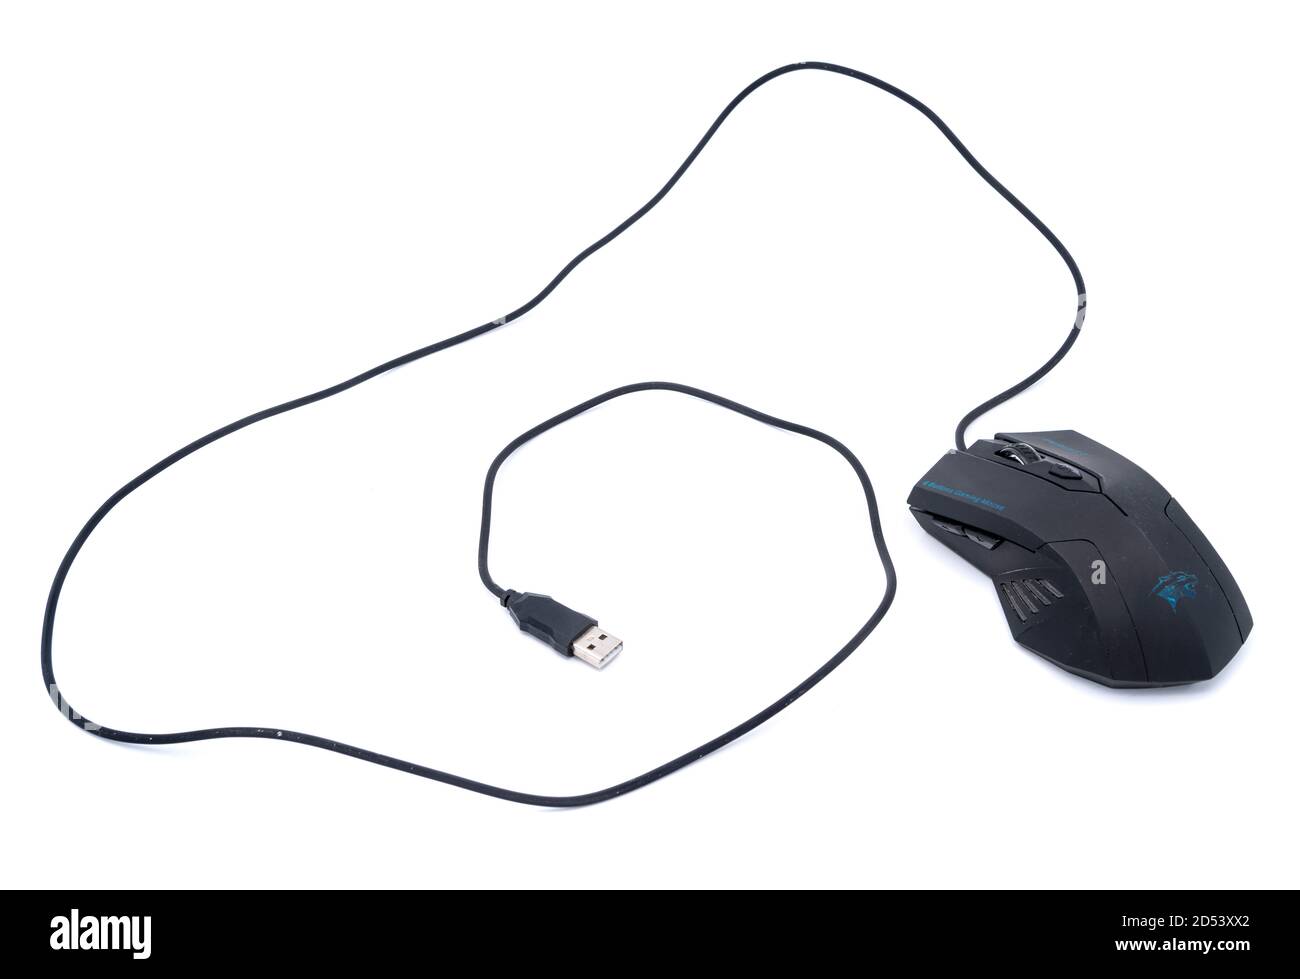 Wired gaming computer mouse cut out isolated on white background Stock Photo